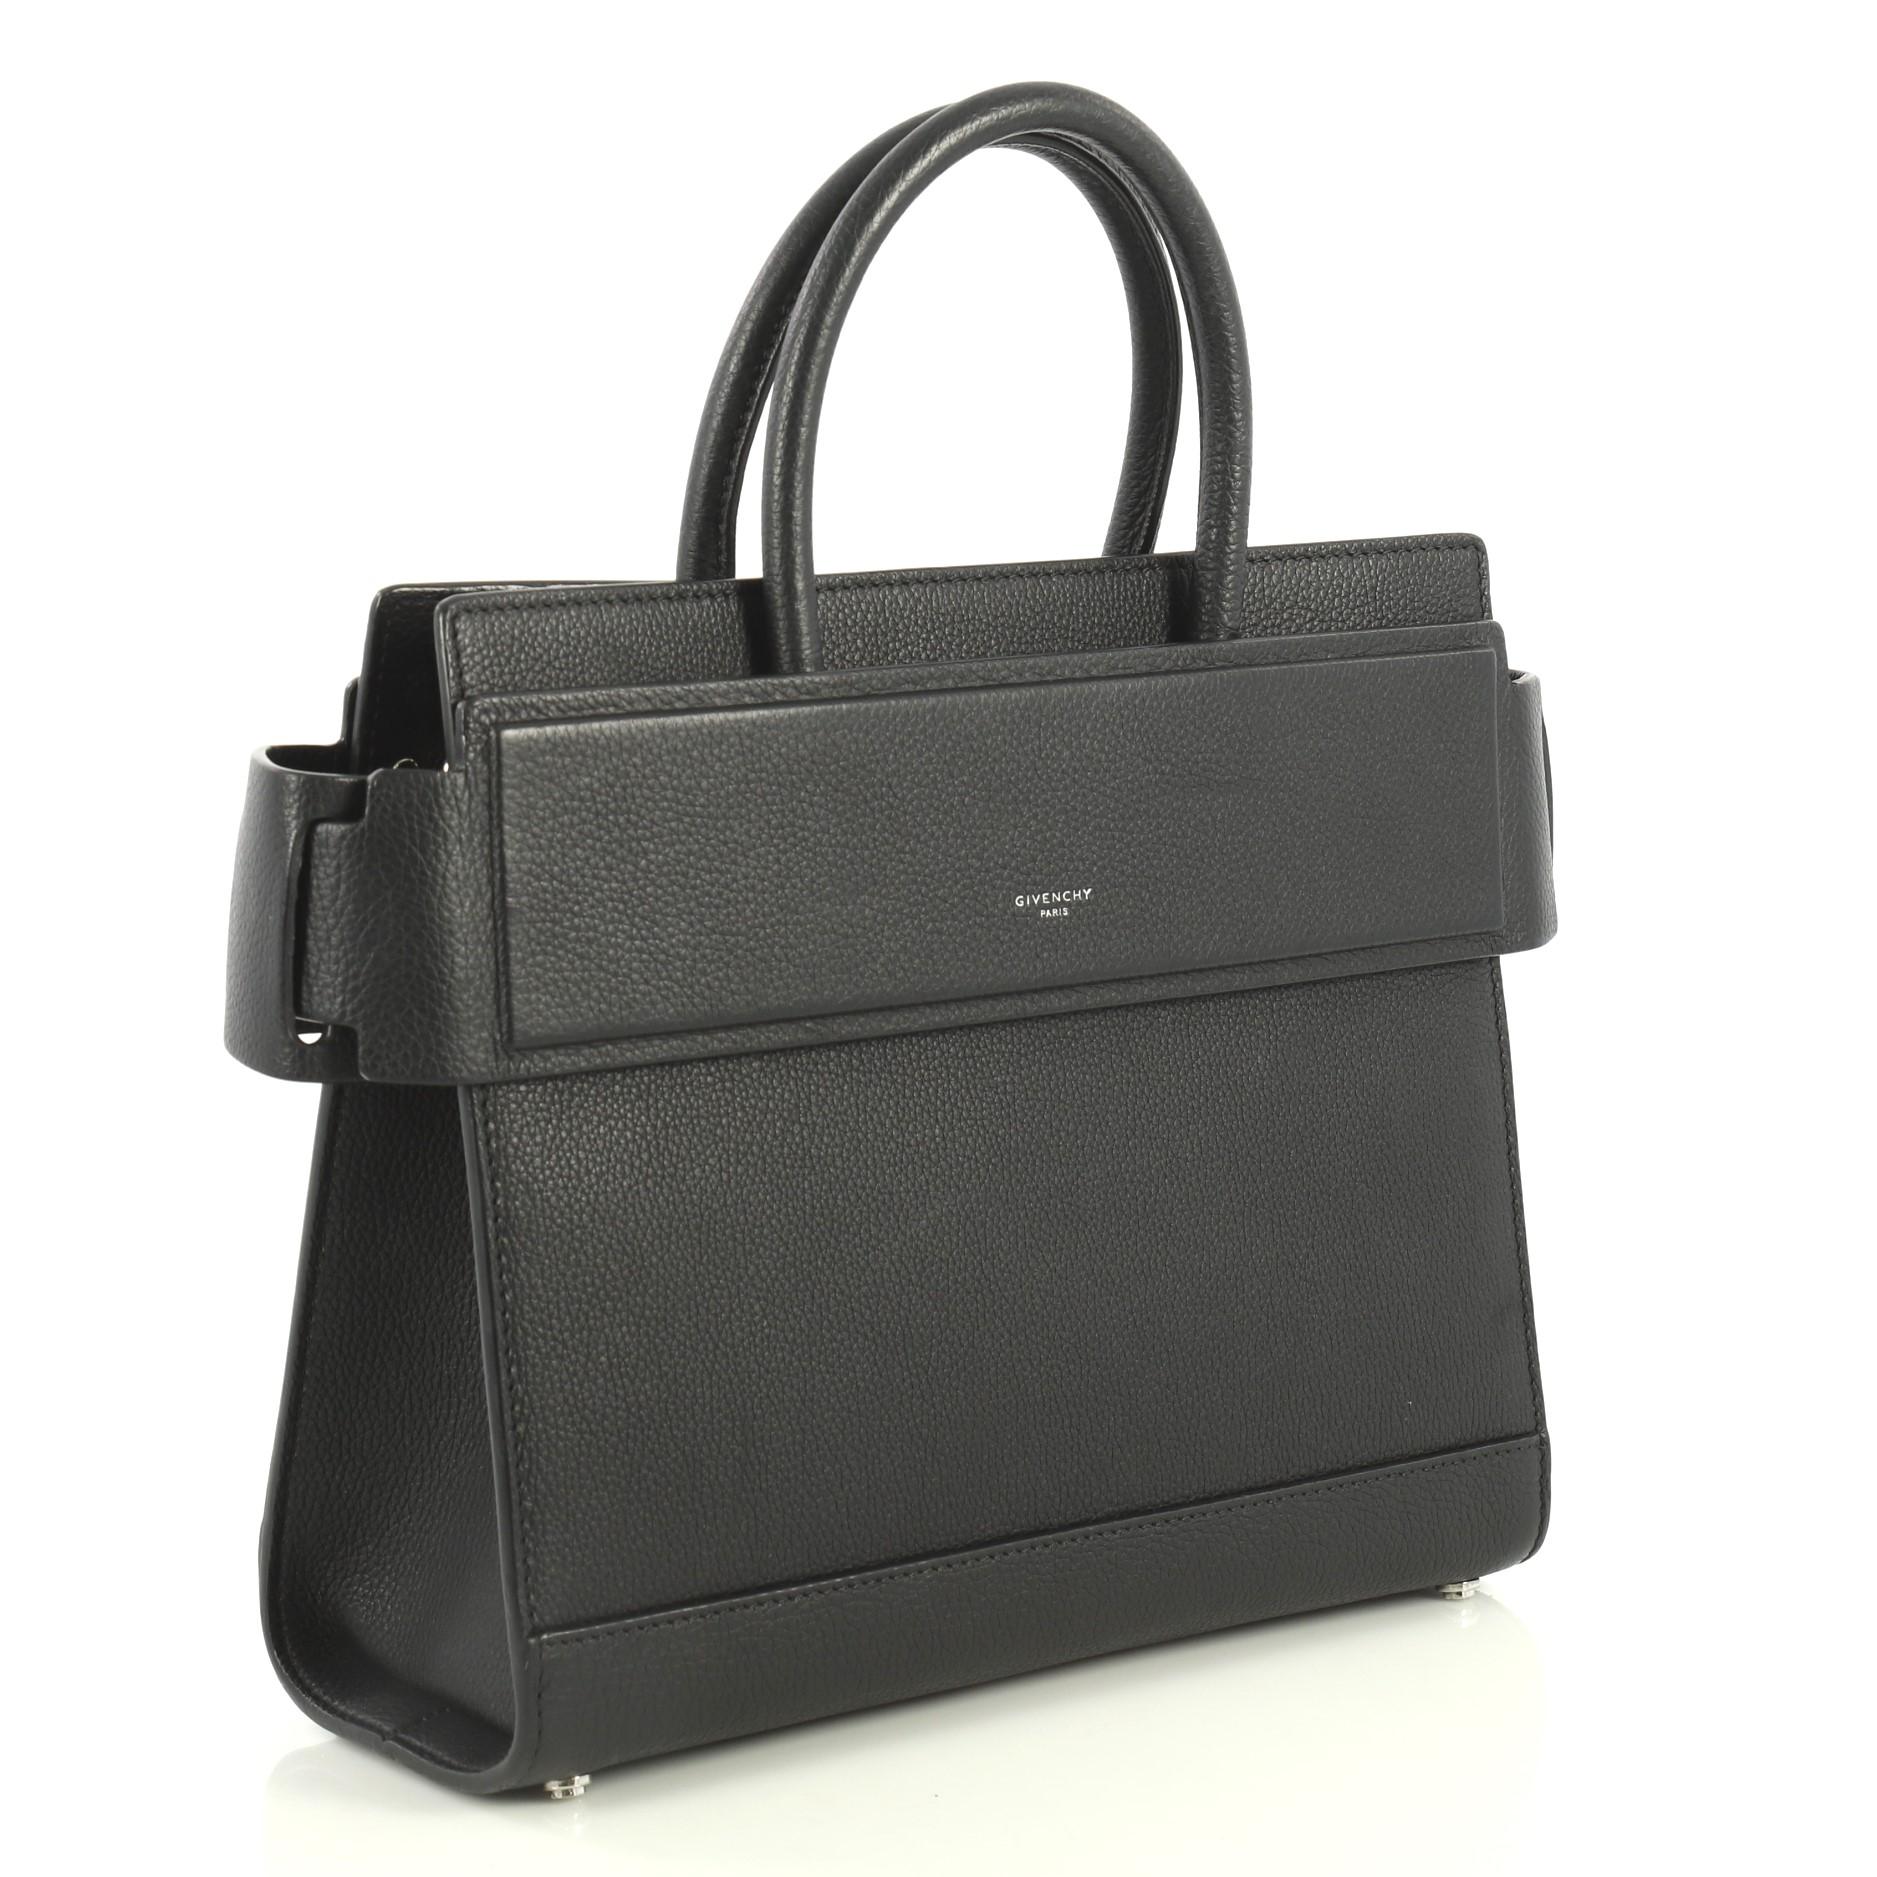 This Givenchy Horizon Satchel Leather Small, crafted from black leather, features dual rolled top handles, belted open top with snap sides, embossed logo at front and silver-tone hardware. It opens to a black leather interior with slip pockets.